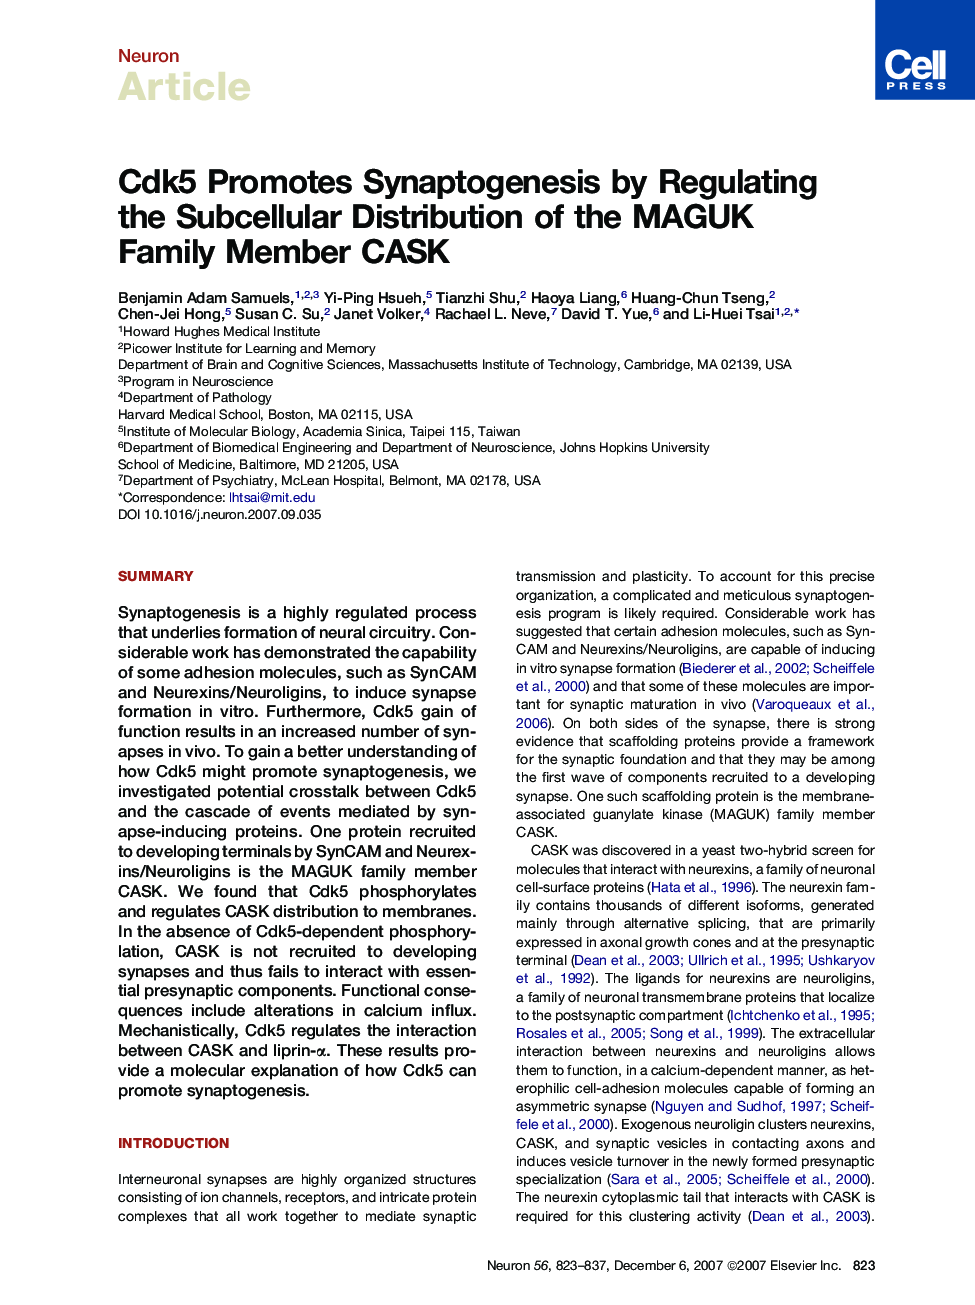 Cdk5 Promotes Synaptogenesis by Regulating the Subcellular Distribution of the MAGUK Family Member CASK